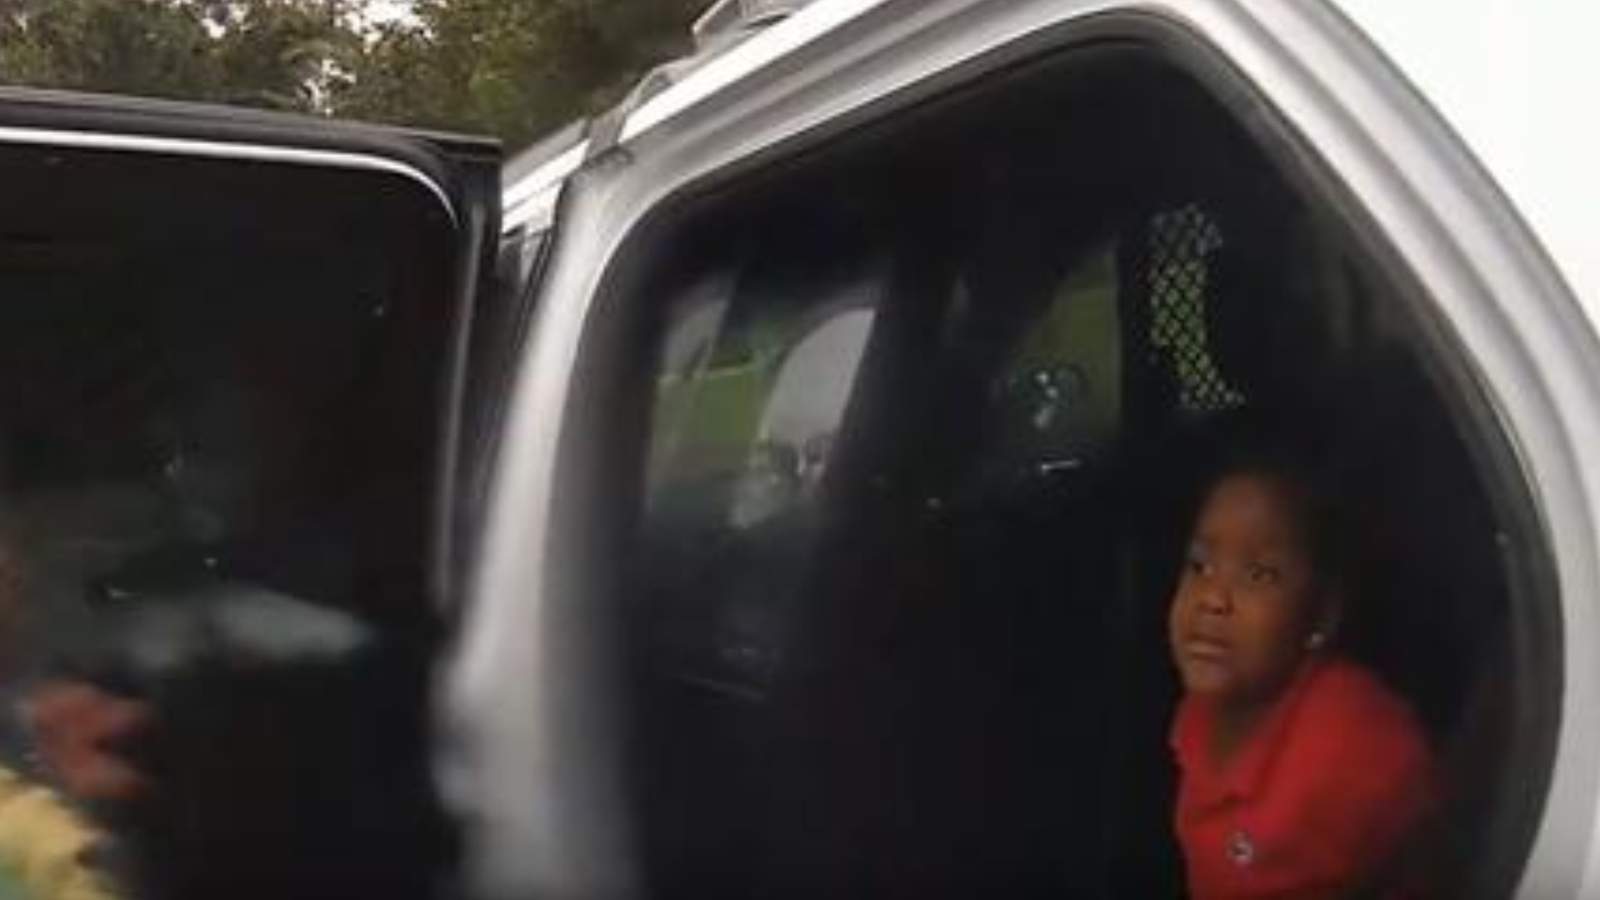 ‘Please let me go:’ Video shows 6-year-old girl crying, pleading during arrest at Orlando school